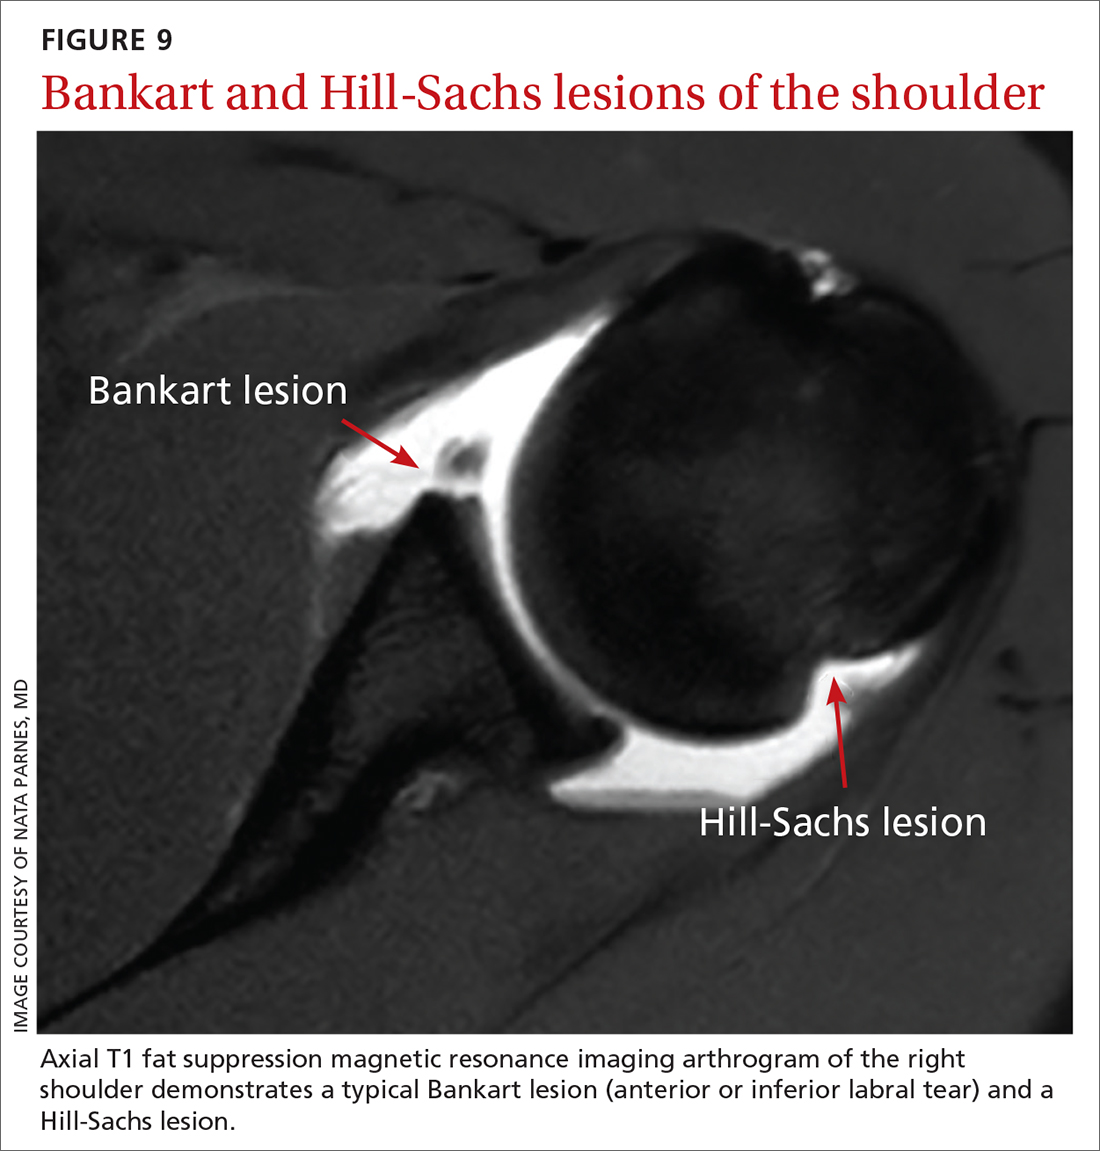 Bankart and Hill-Sachs lesions of the shoulder